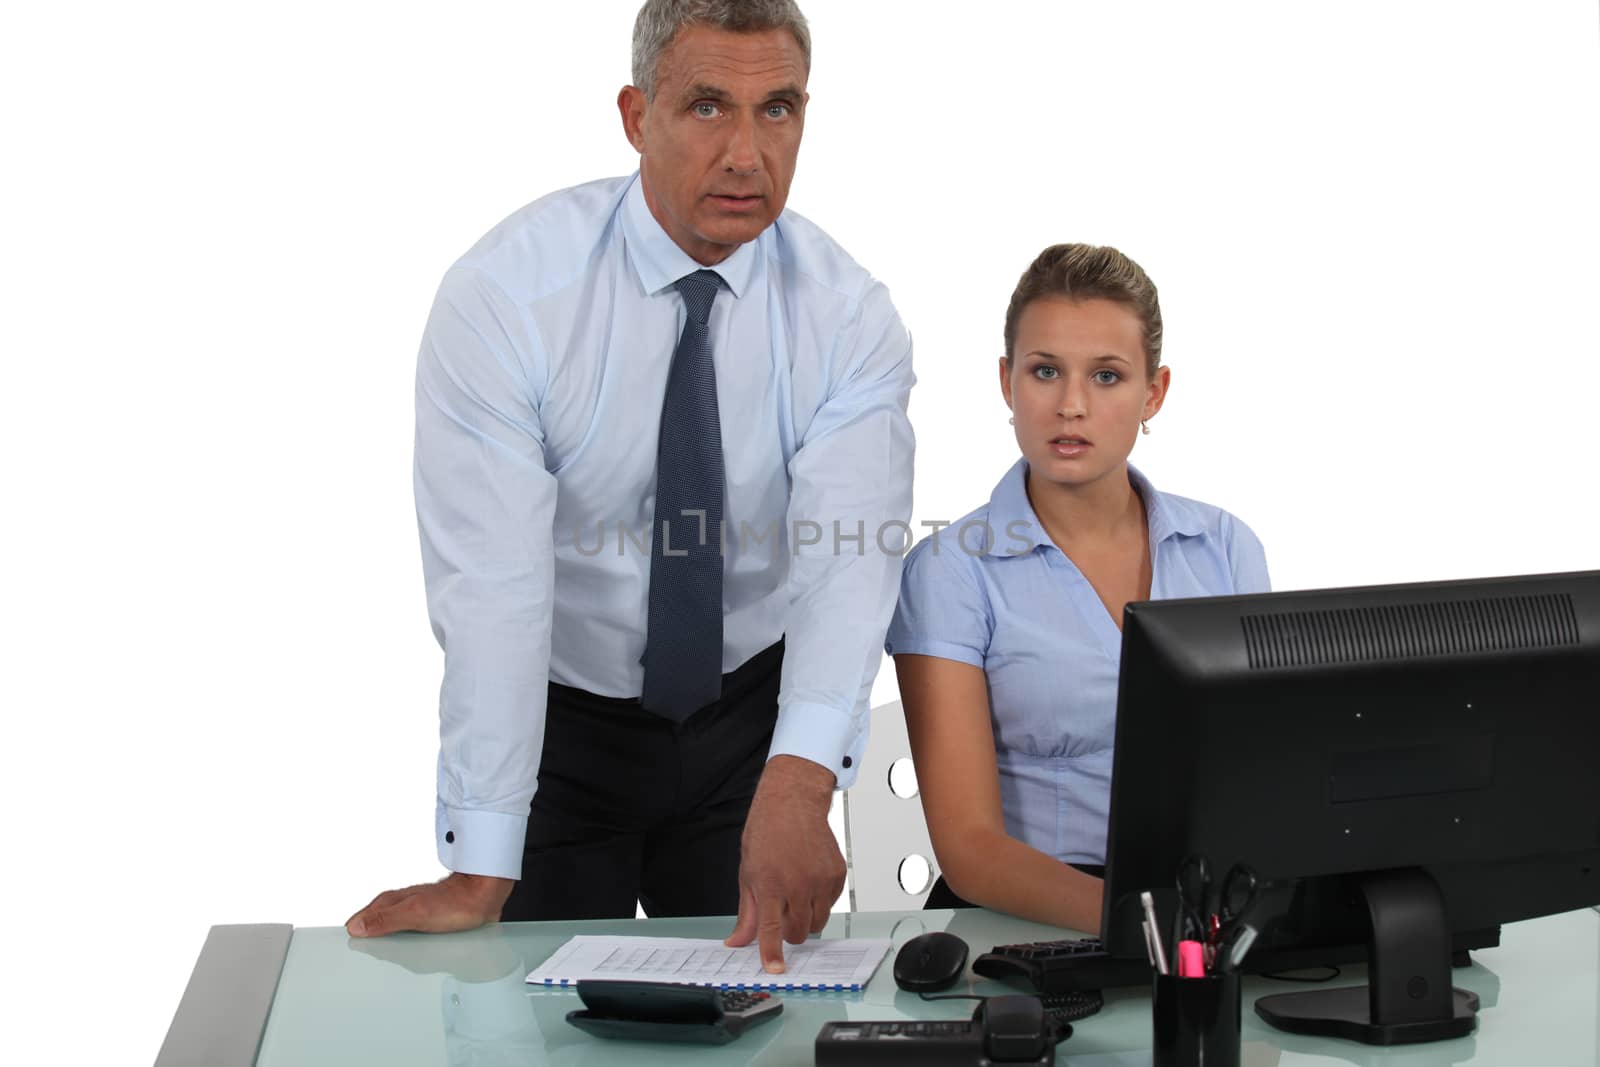 Businessman posing with his secretary by phovoir